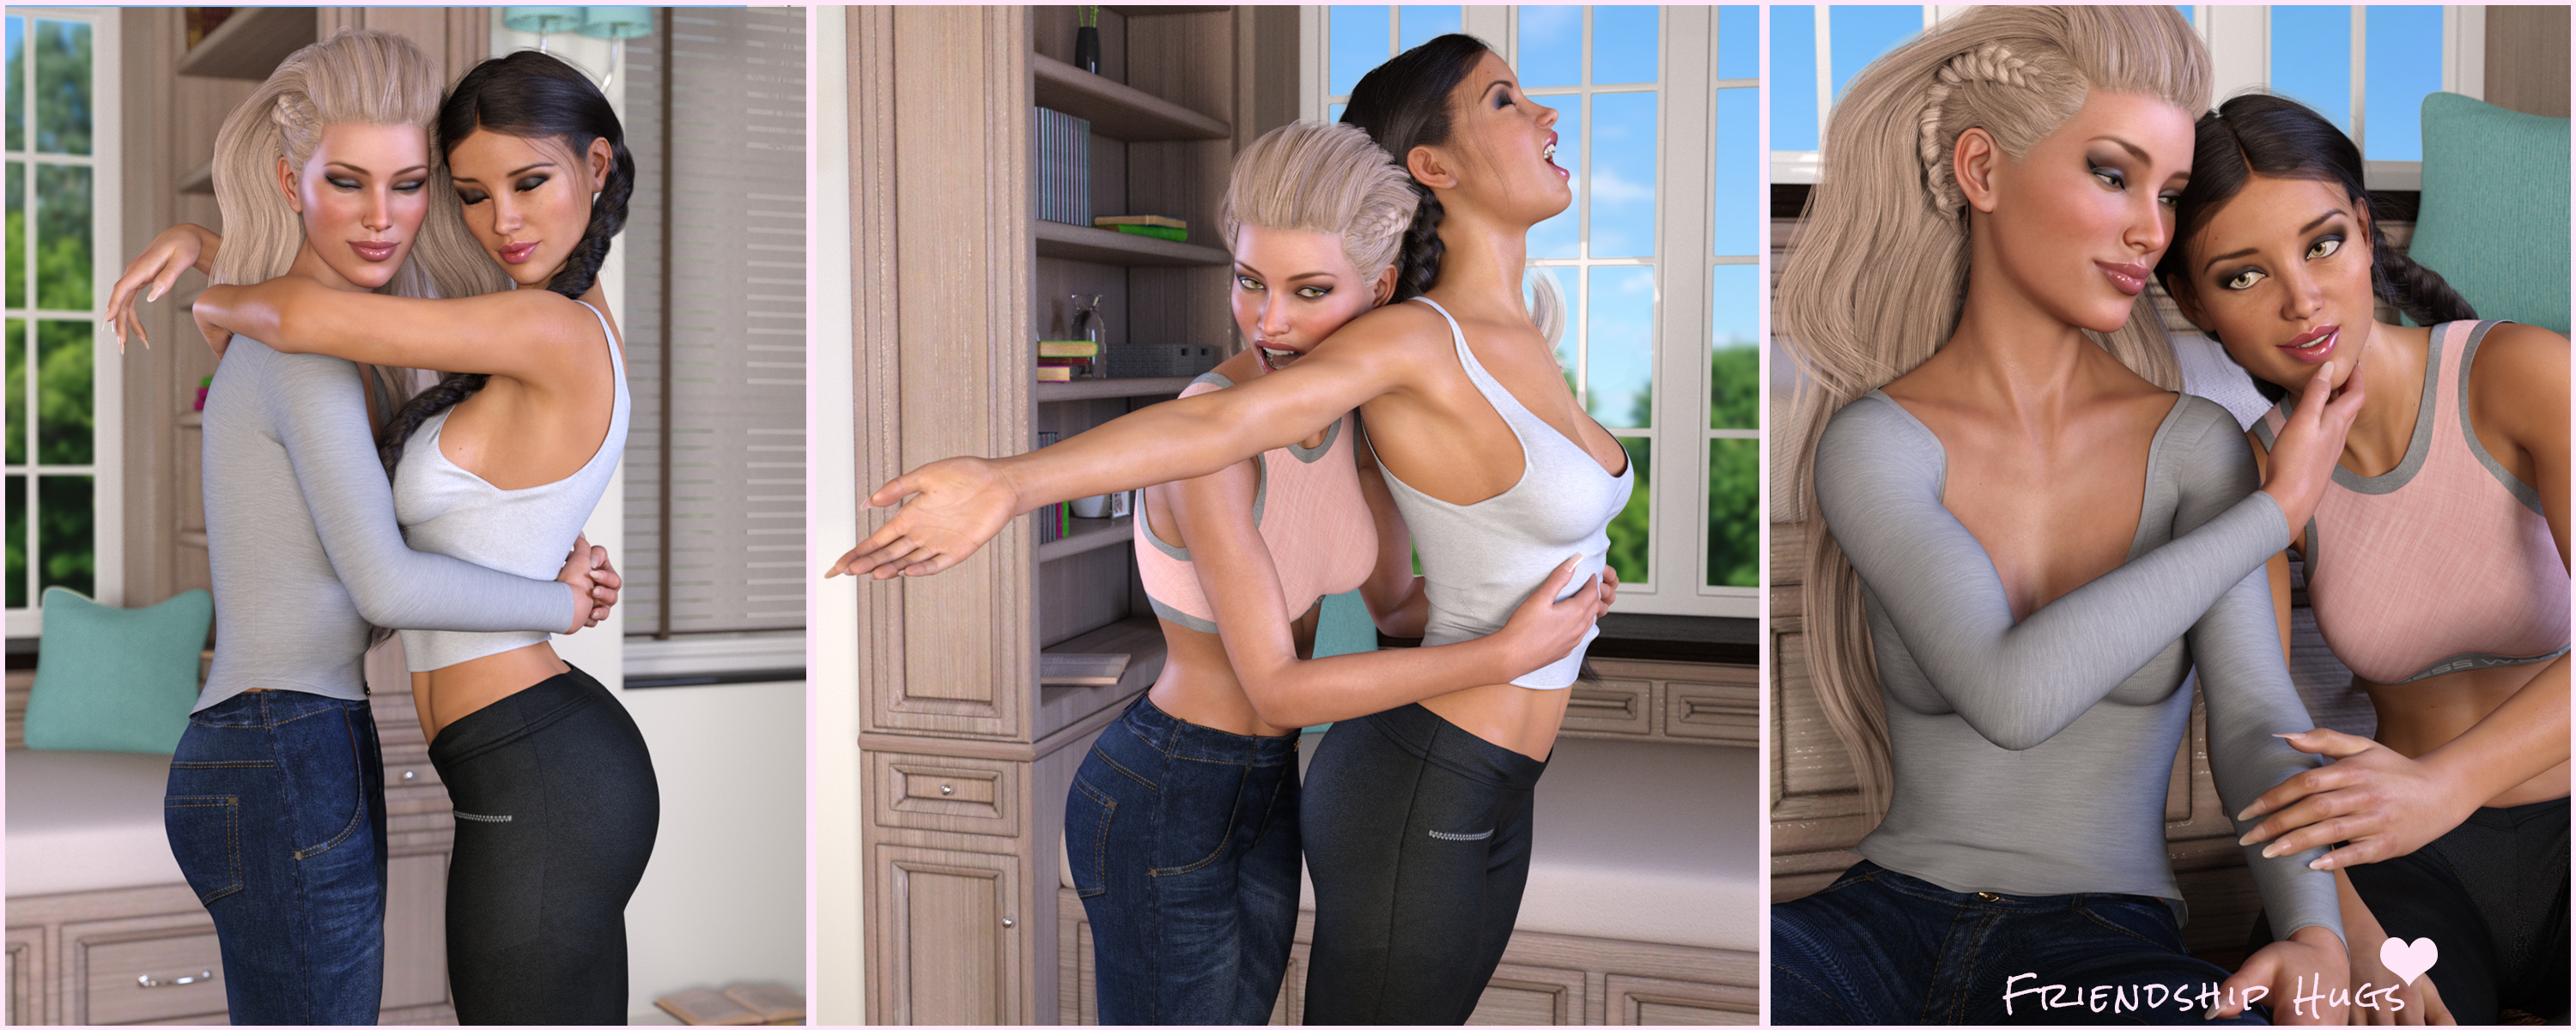 Z The Art Of Hugging - Couple Poses for Genesis 3 and 8 by: Zeddicuss, 3D Models by Daz 3D